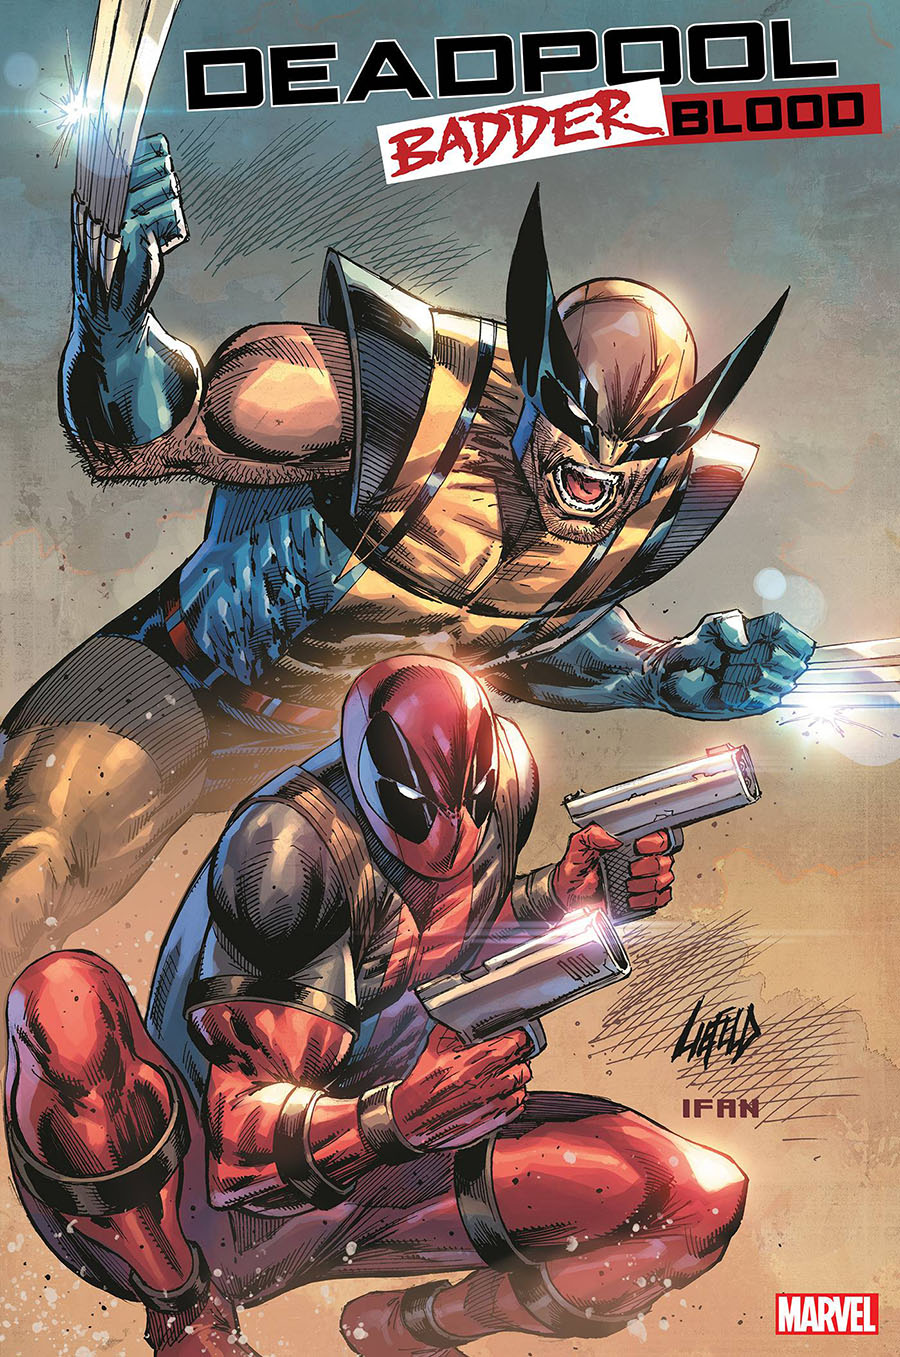 Deadpool Badder Blood #1 Cover C Variant Rob Liefeld Cover